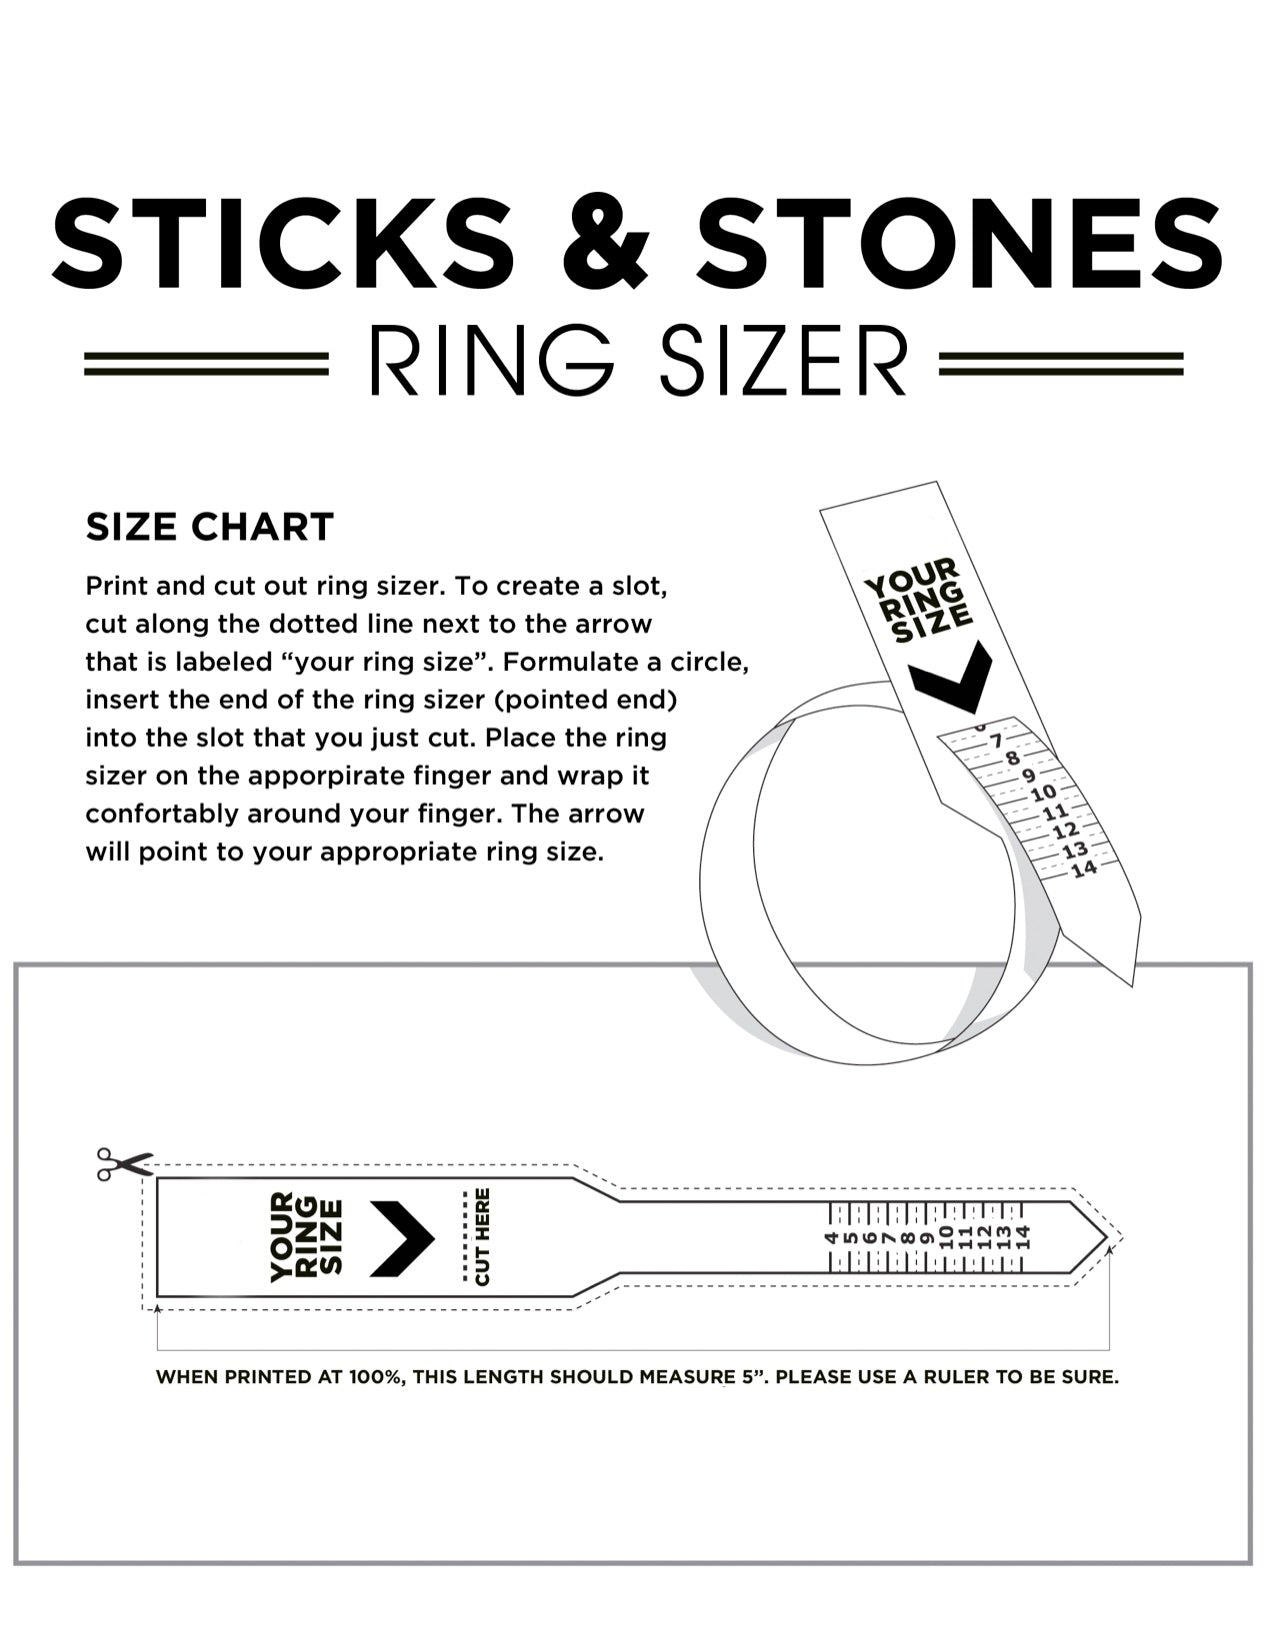 Sticks & Stones At-Home Ring Sizer